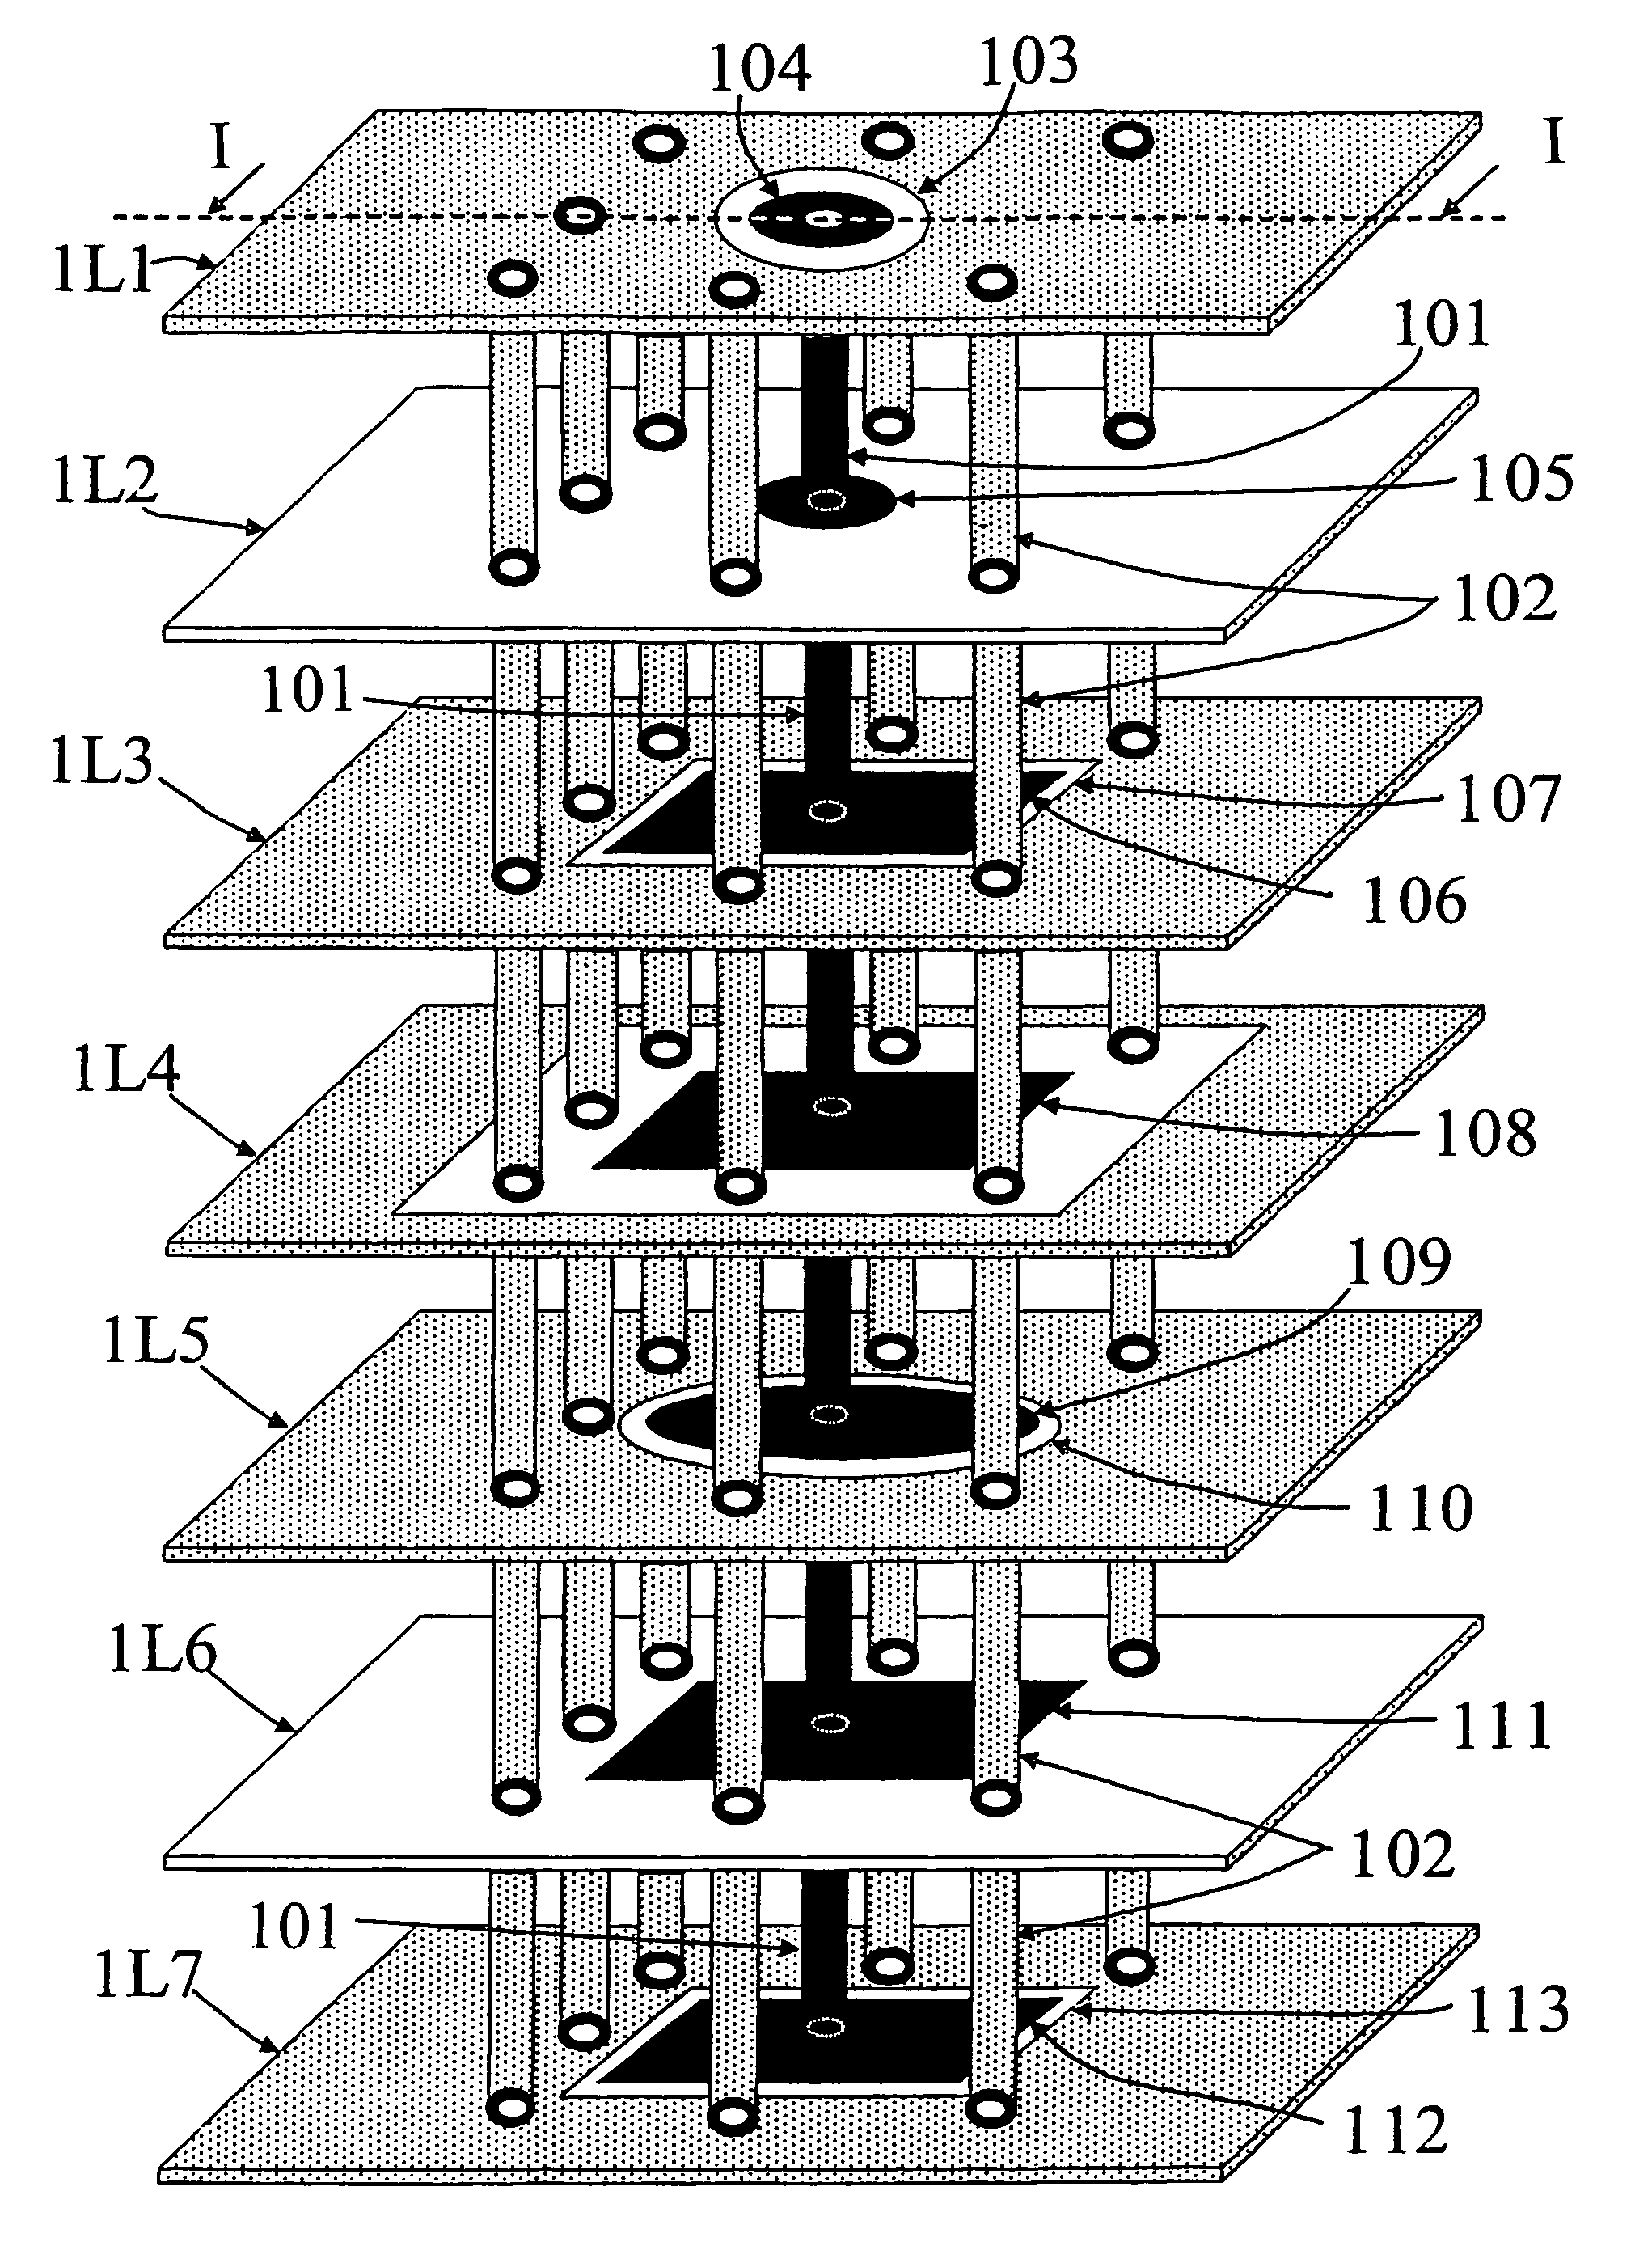 Composite via structures and filters in multilayer printed circuit boards